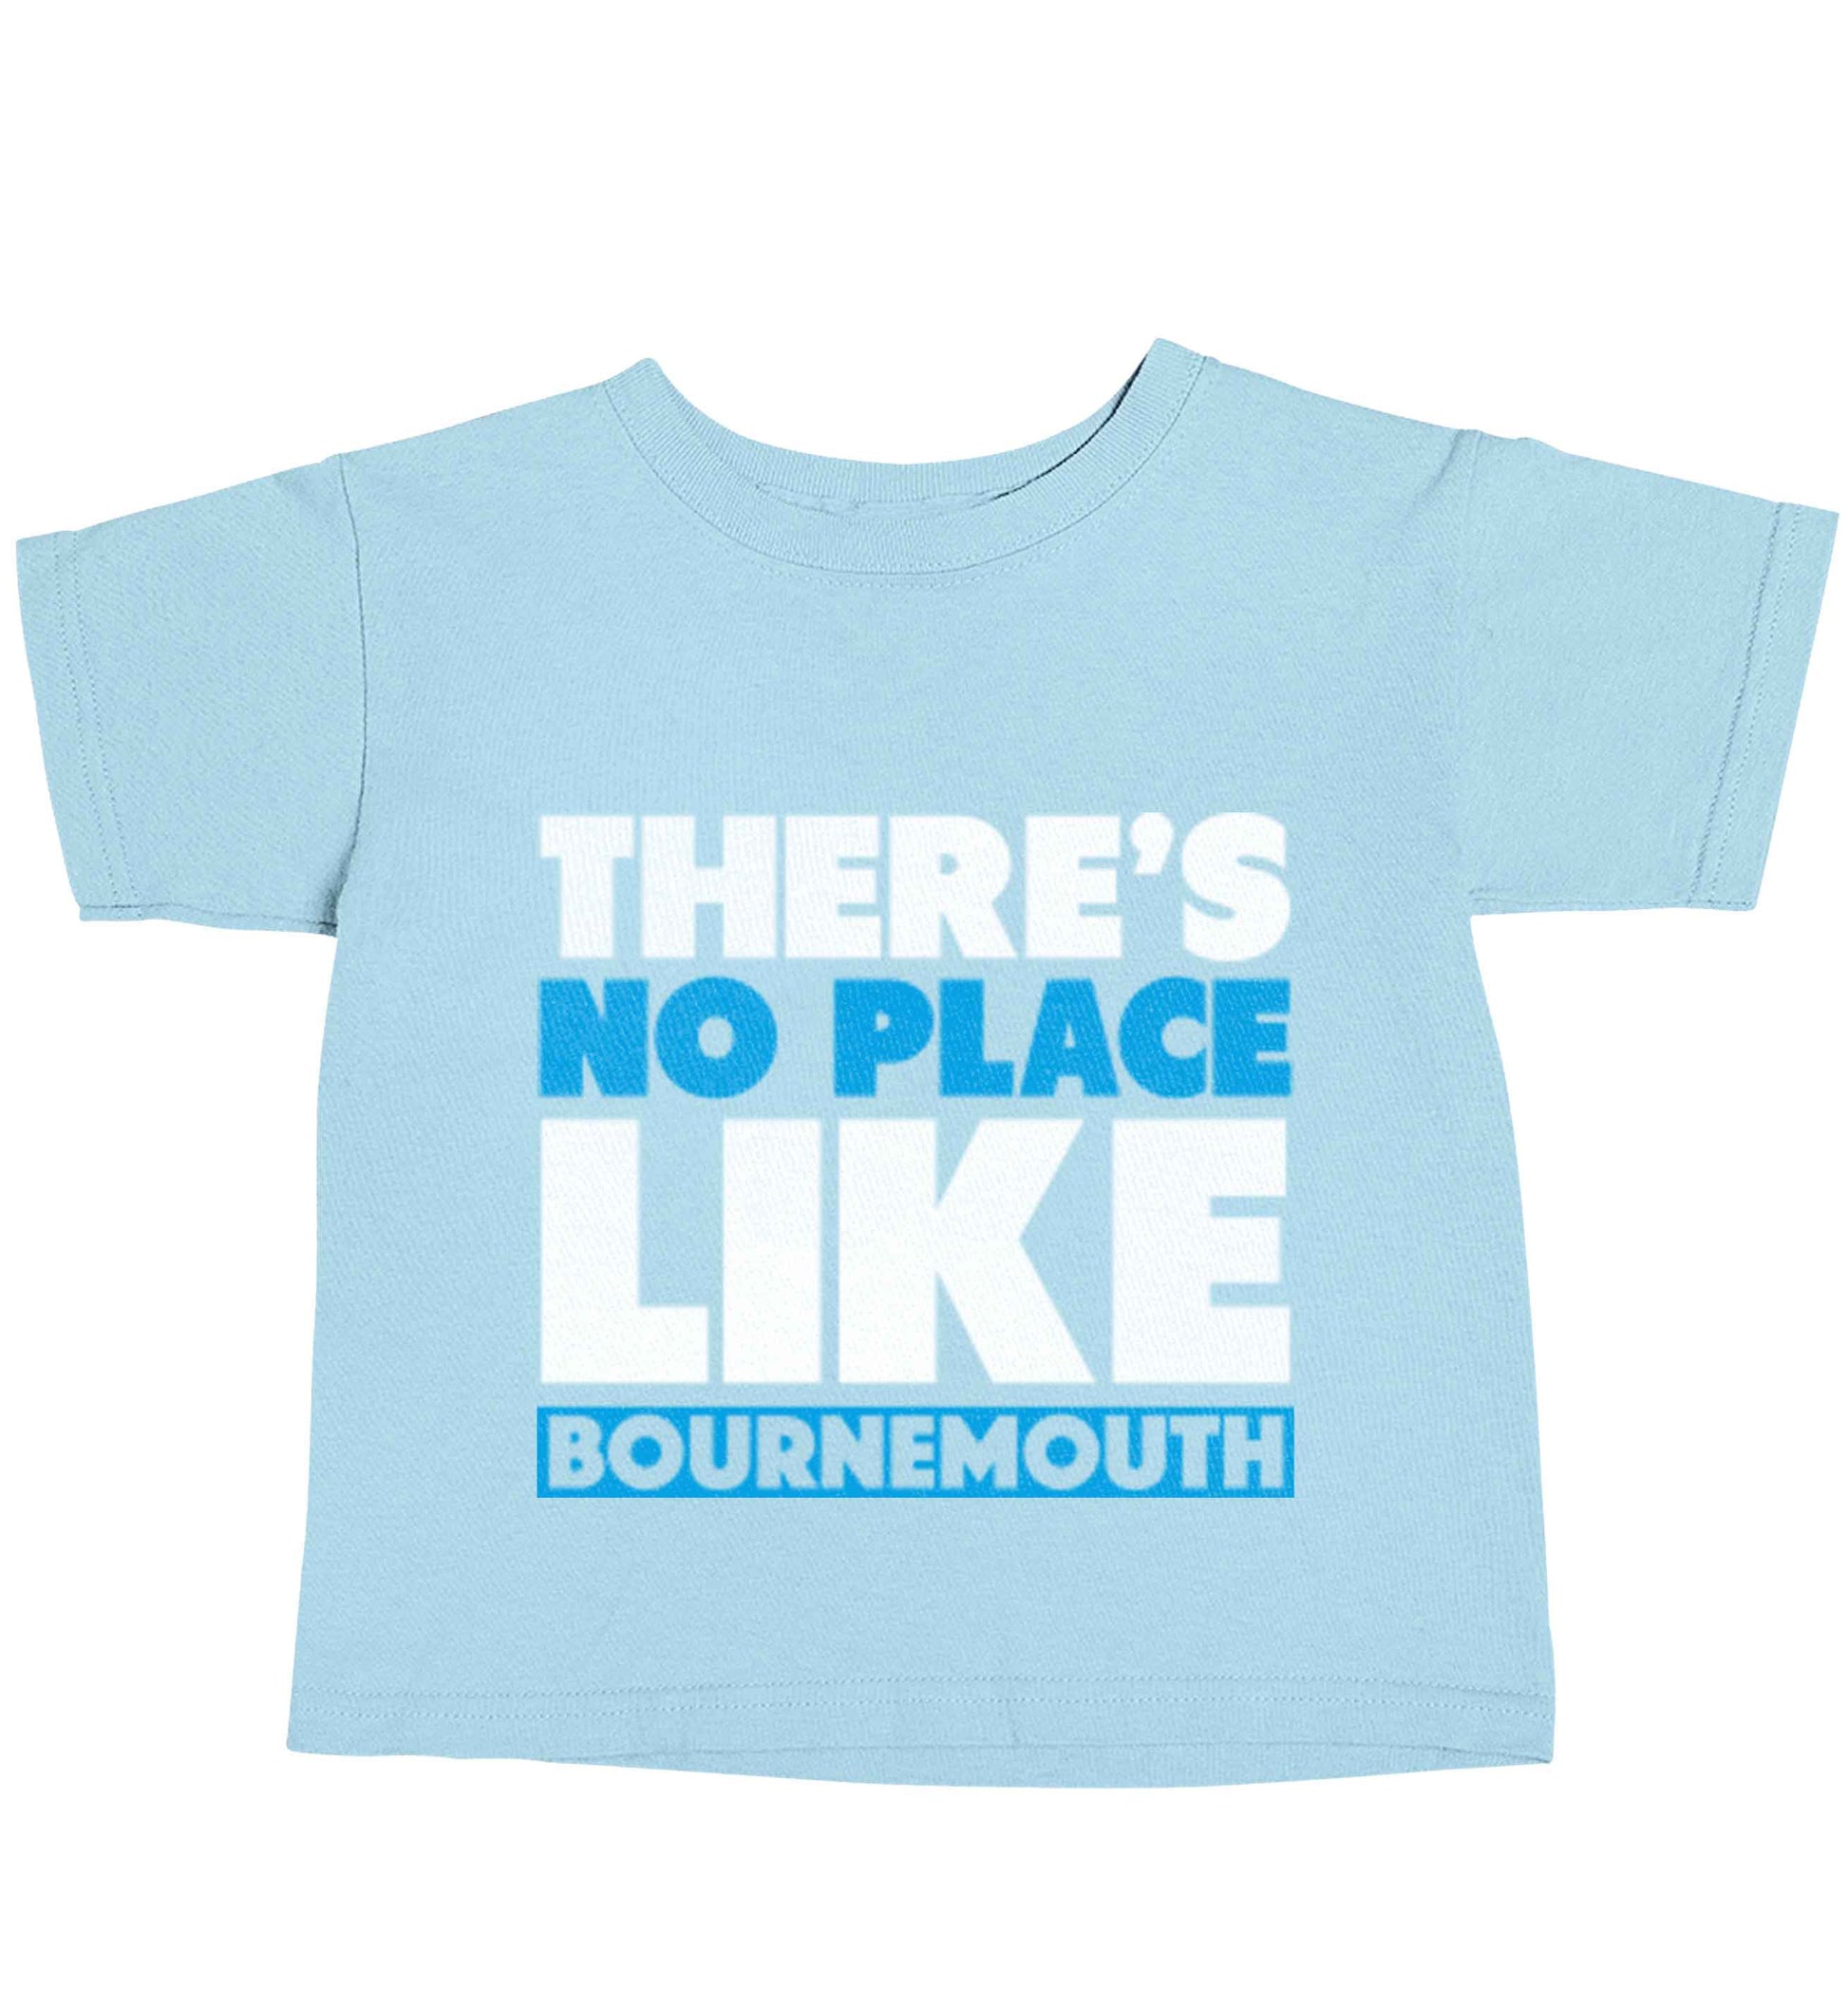 There's no place like Bournemouth light blue baby toddler Tshirt 2 Years